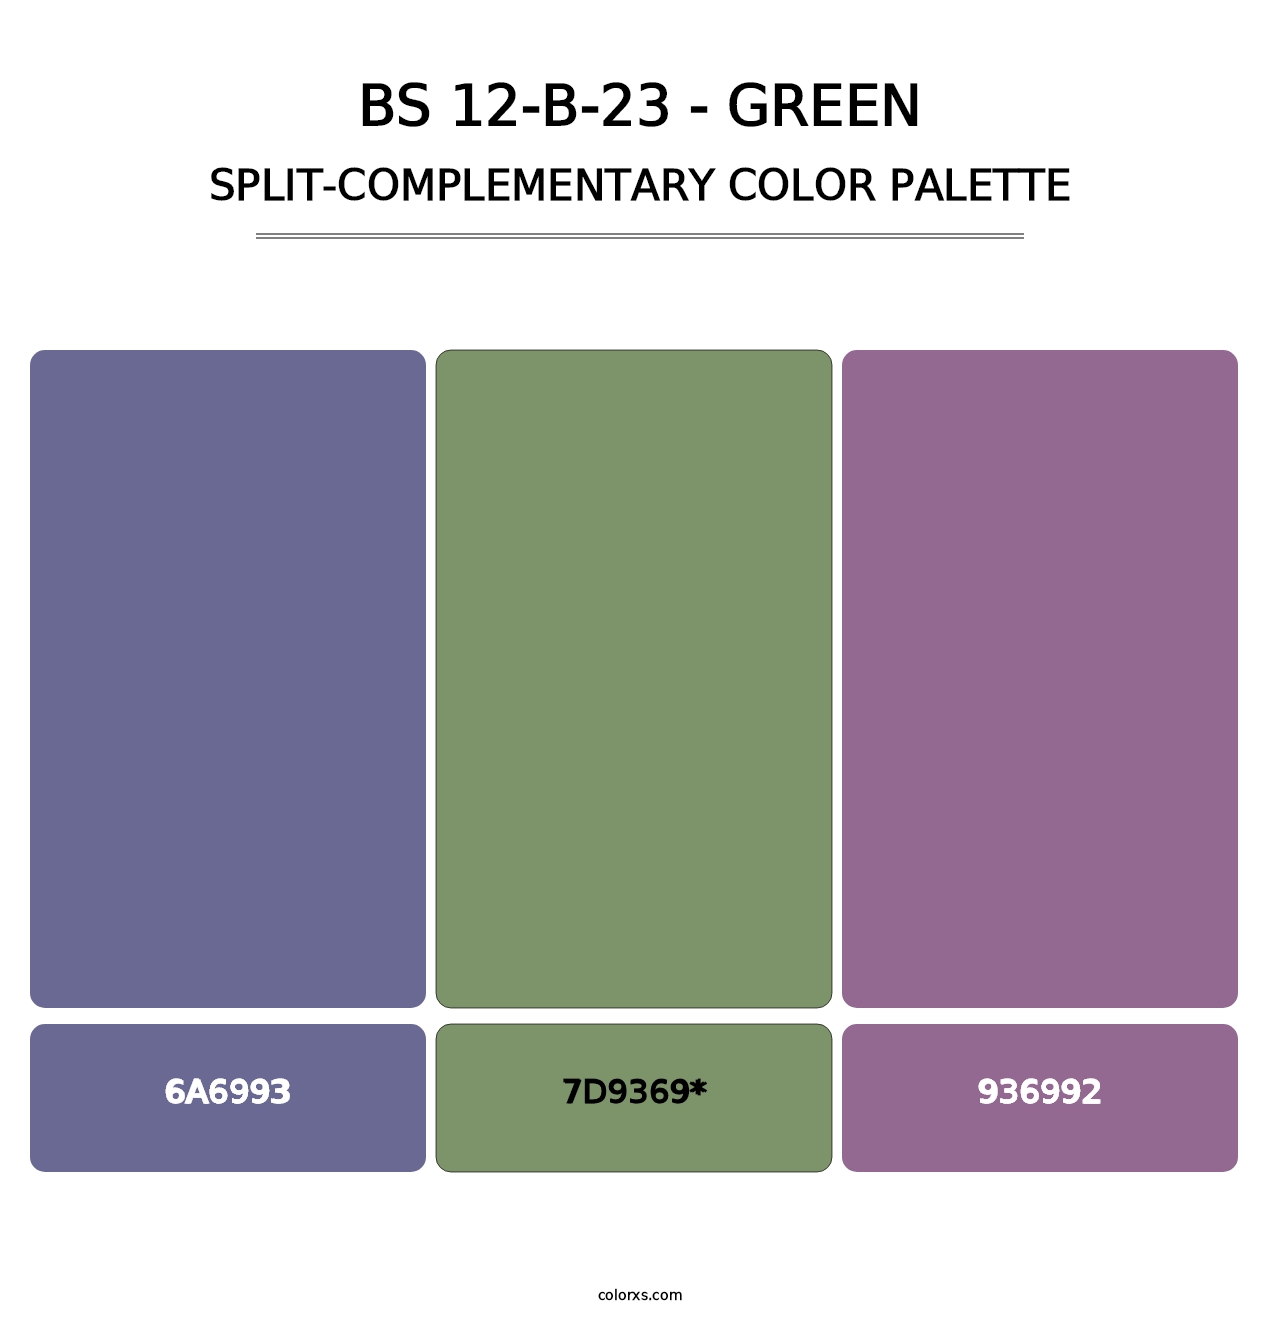 BS 12-B-23 - Green - Split-Complementary Color Palette